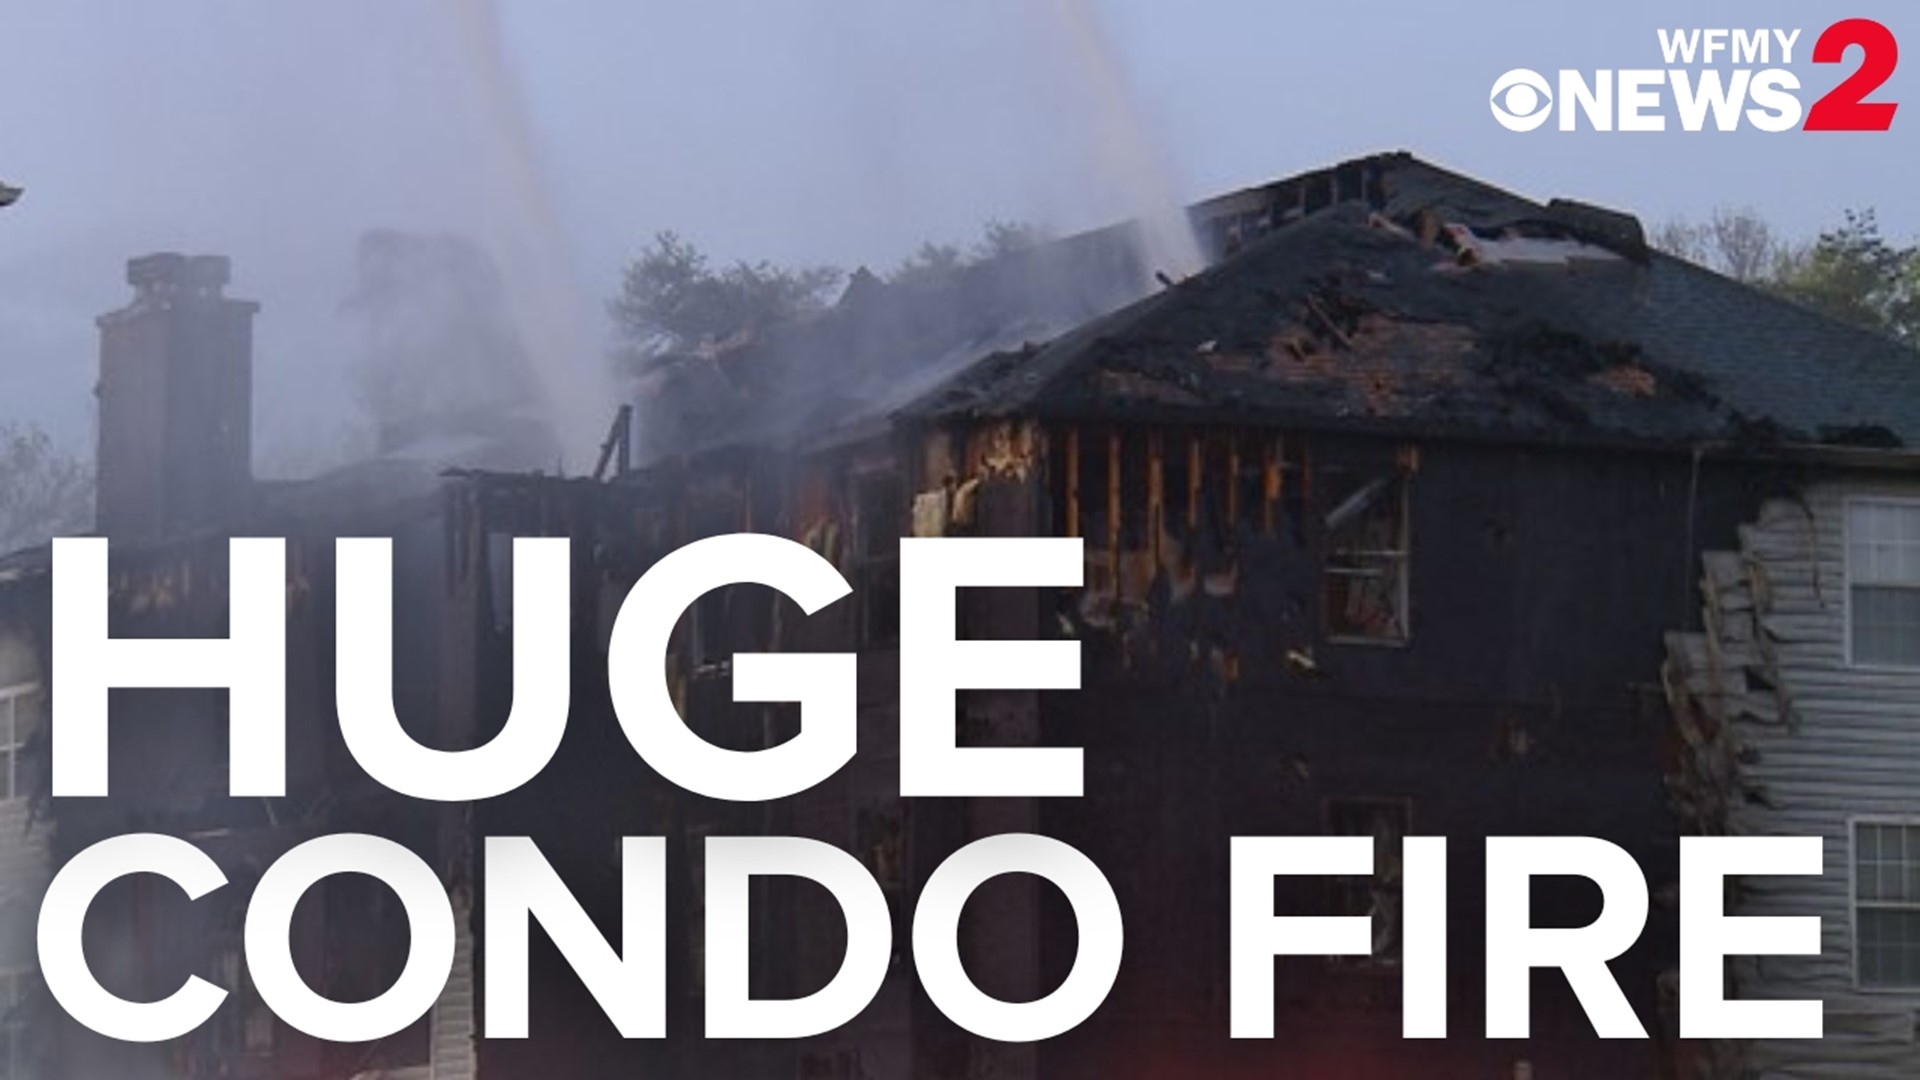 Multiple people need a place to stay after a fire destroyed a condo building.